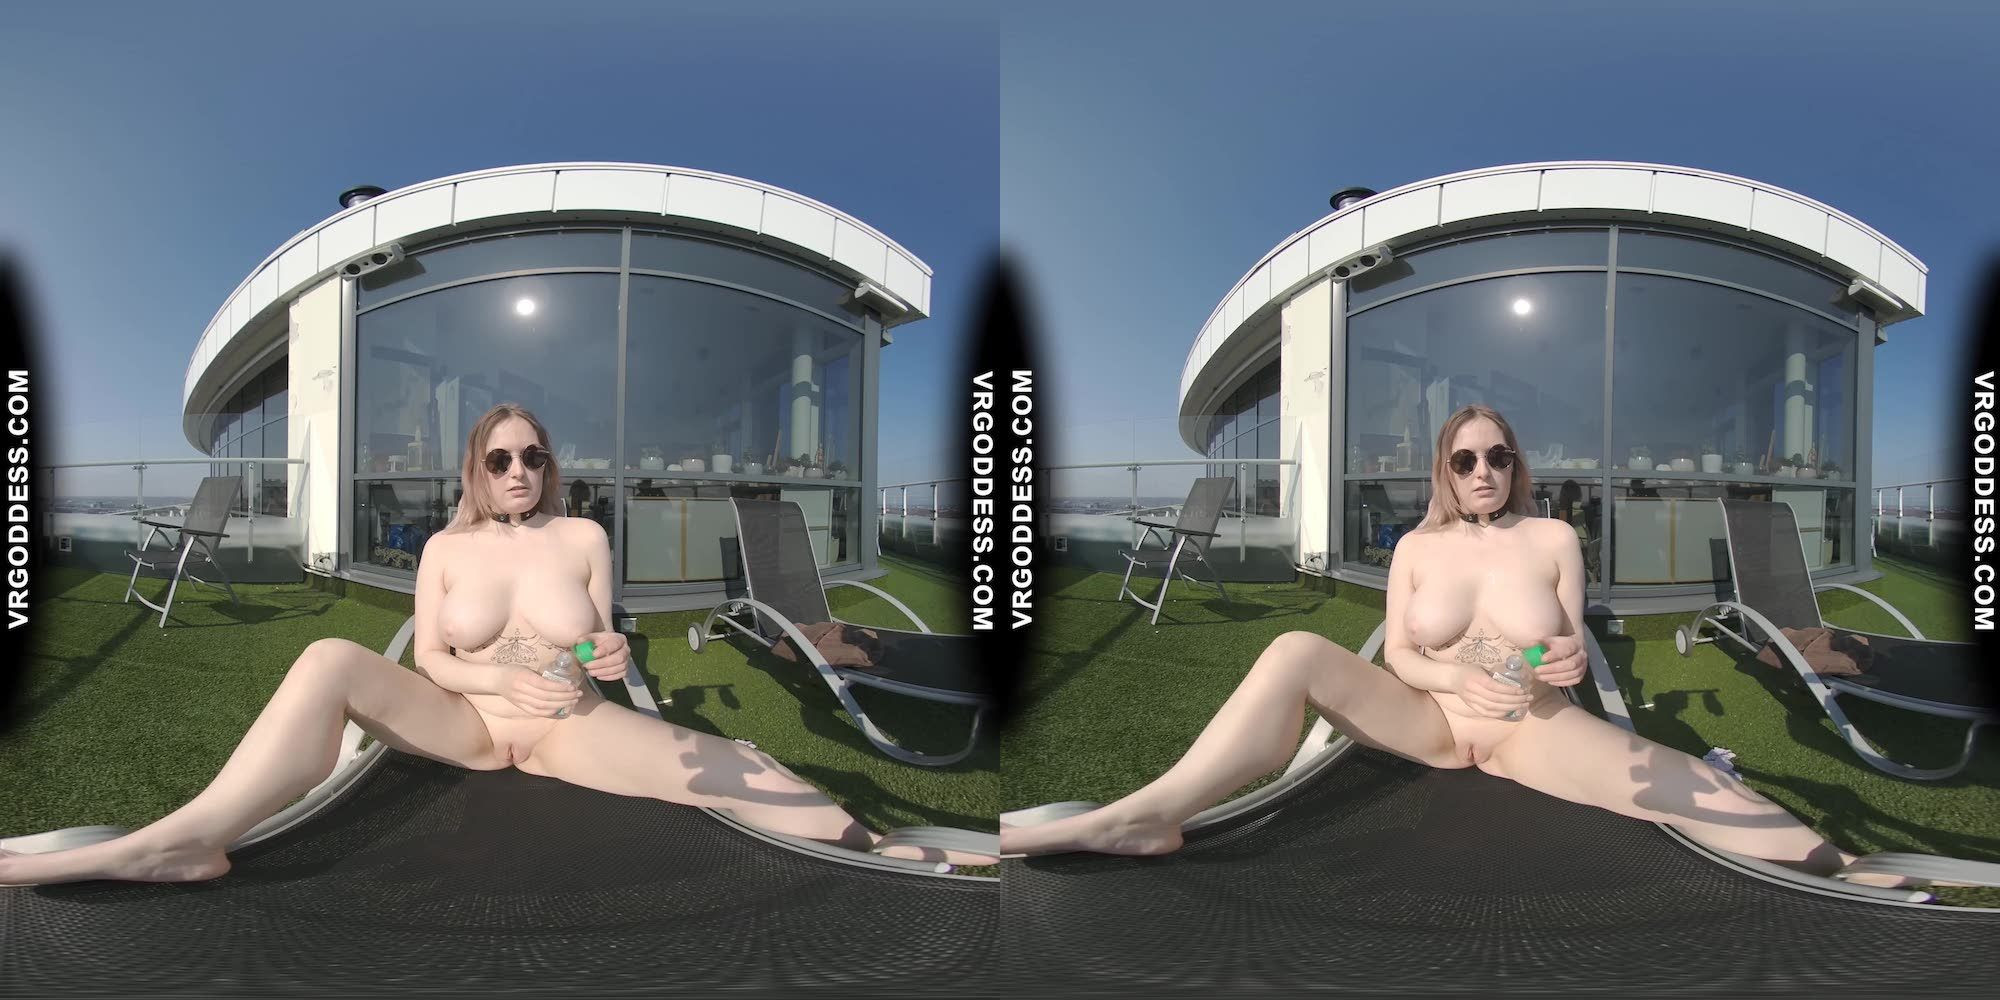 Diana Rooftop Masturbating While Sunbathing Oiling Her Huge Double D Tits Then... Slideshow